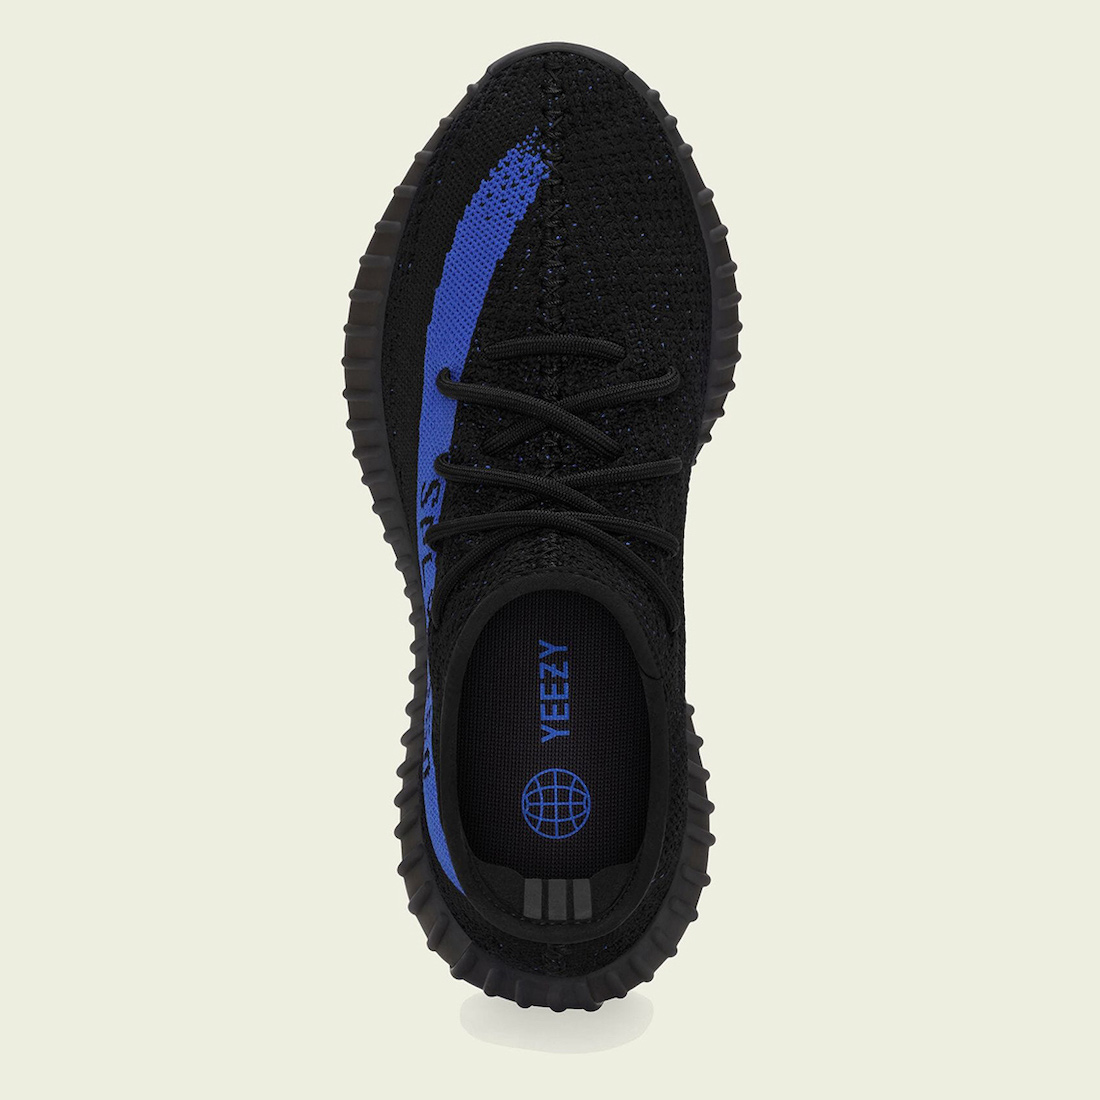 adidas-Yeezy-Boost-350-V2-Dazzling-Blue-GY7164-Release-Date-3